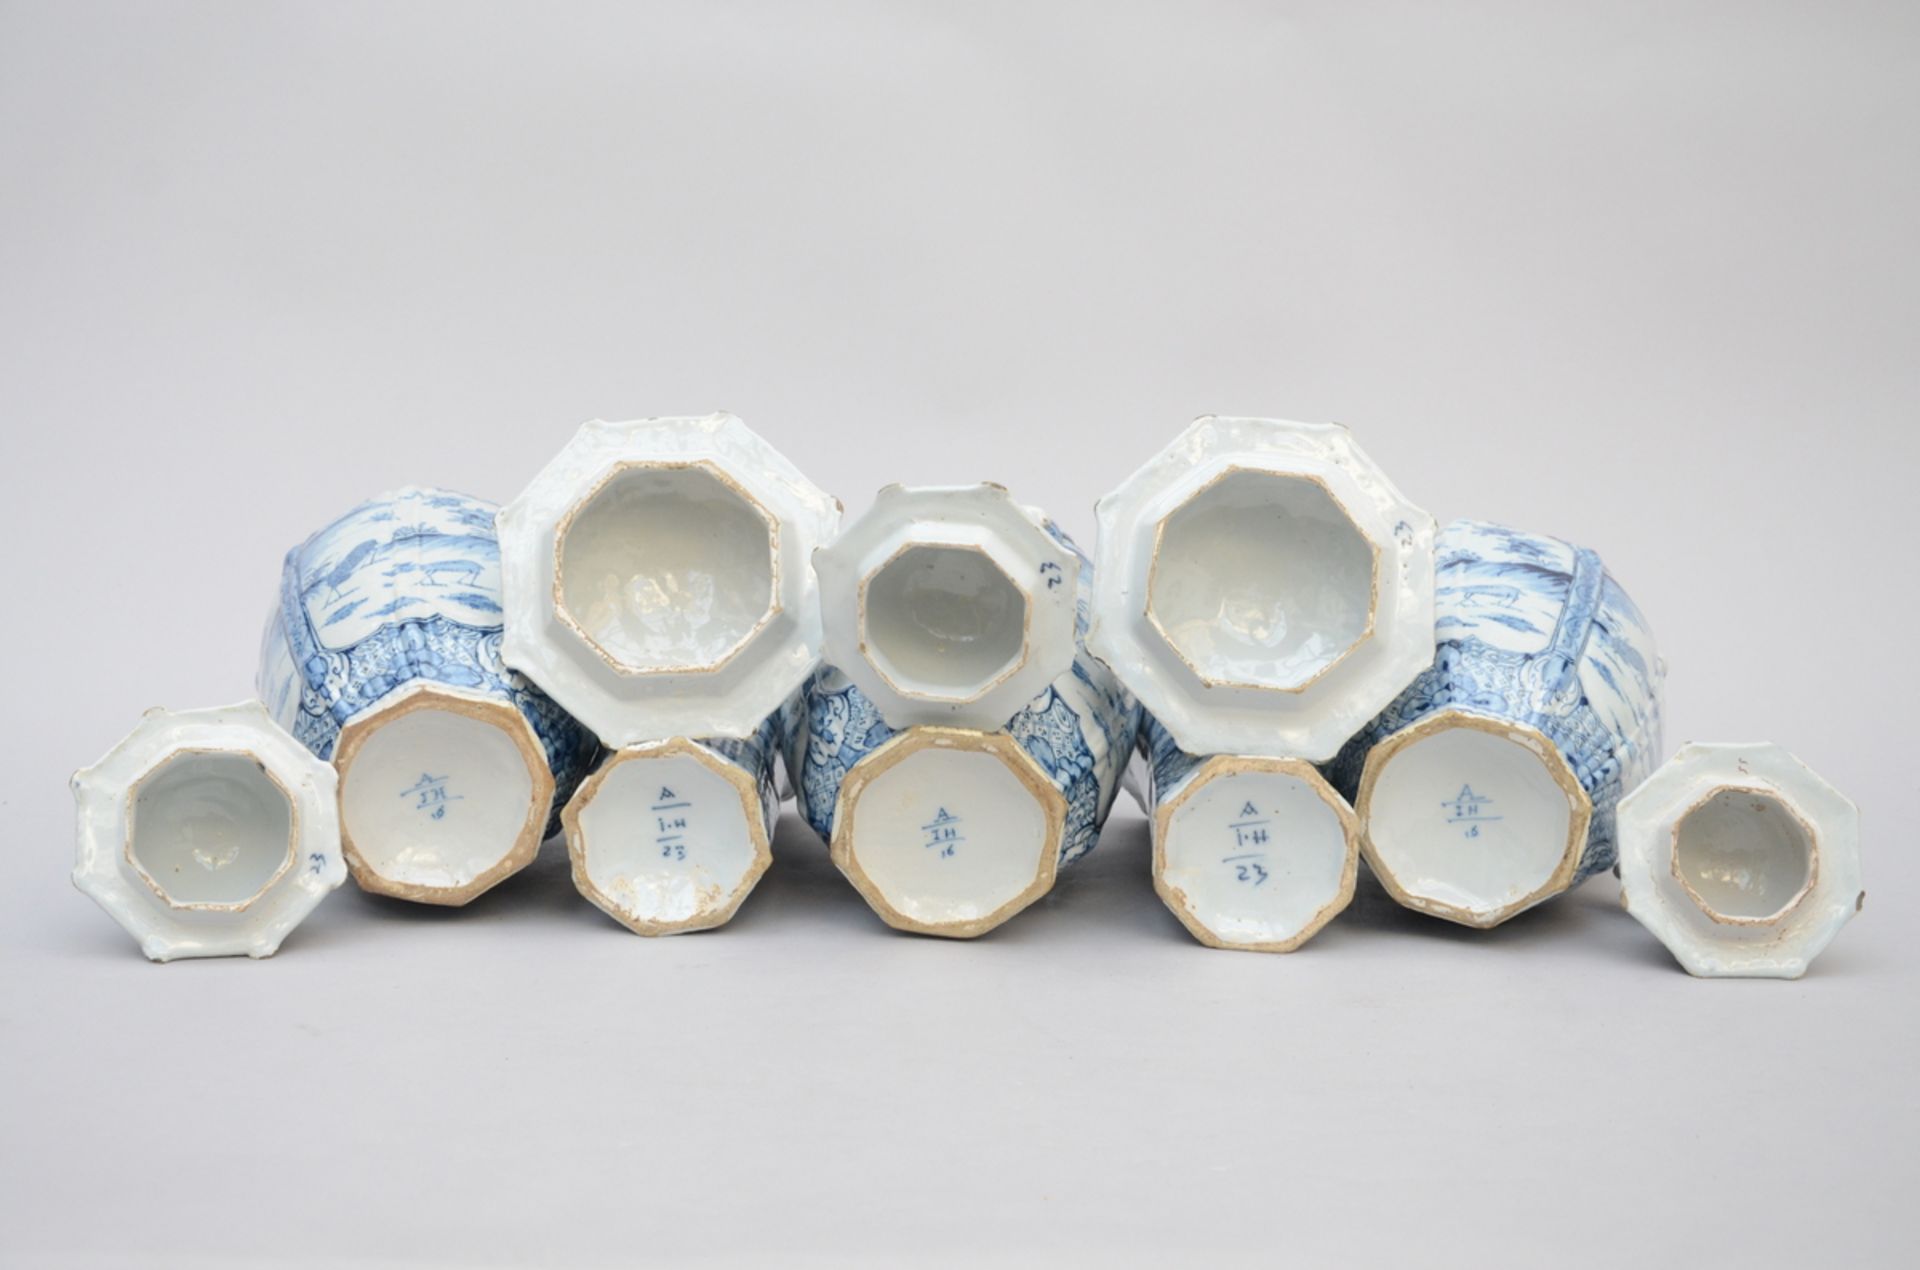 A five-piece blue and white set in Delft earthenware with chinoiserie decoration, 18th century ( - Image 5 of 6